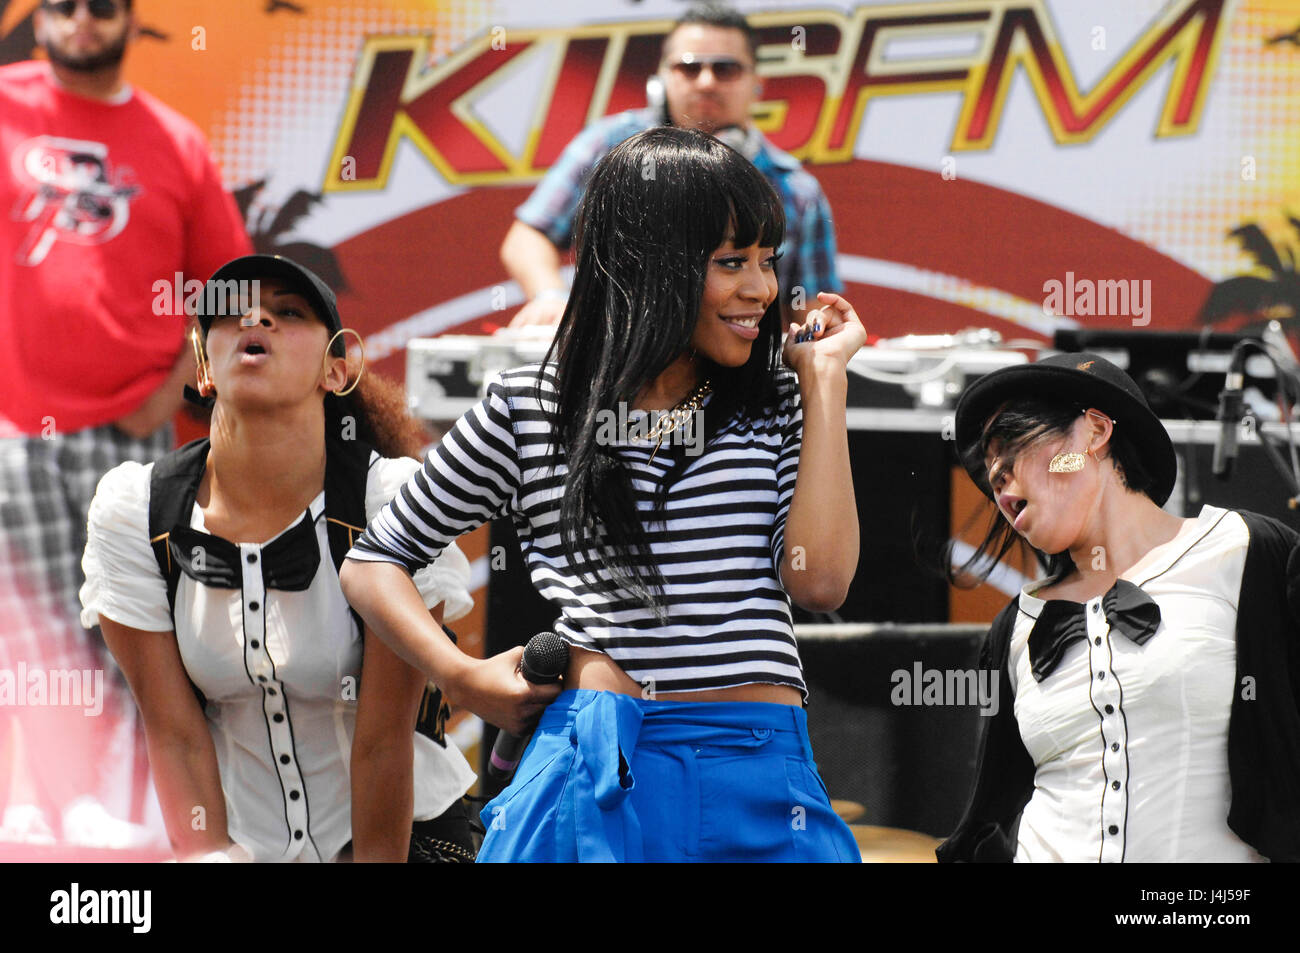 Auburn performs at KIIS FM's Wango Tango 2010 at the Staples Center on May 15, 2010 in Los Angeles, California. Stock Photo